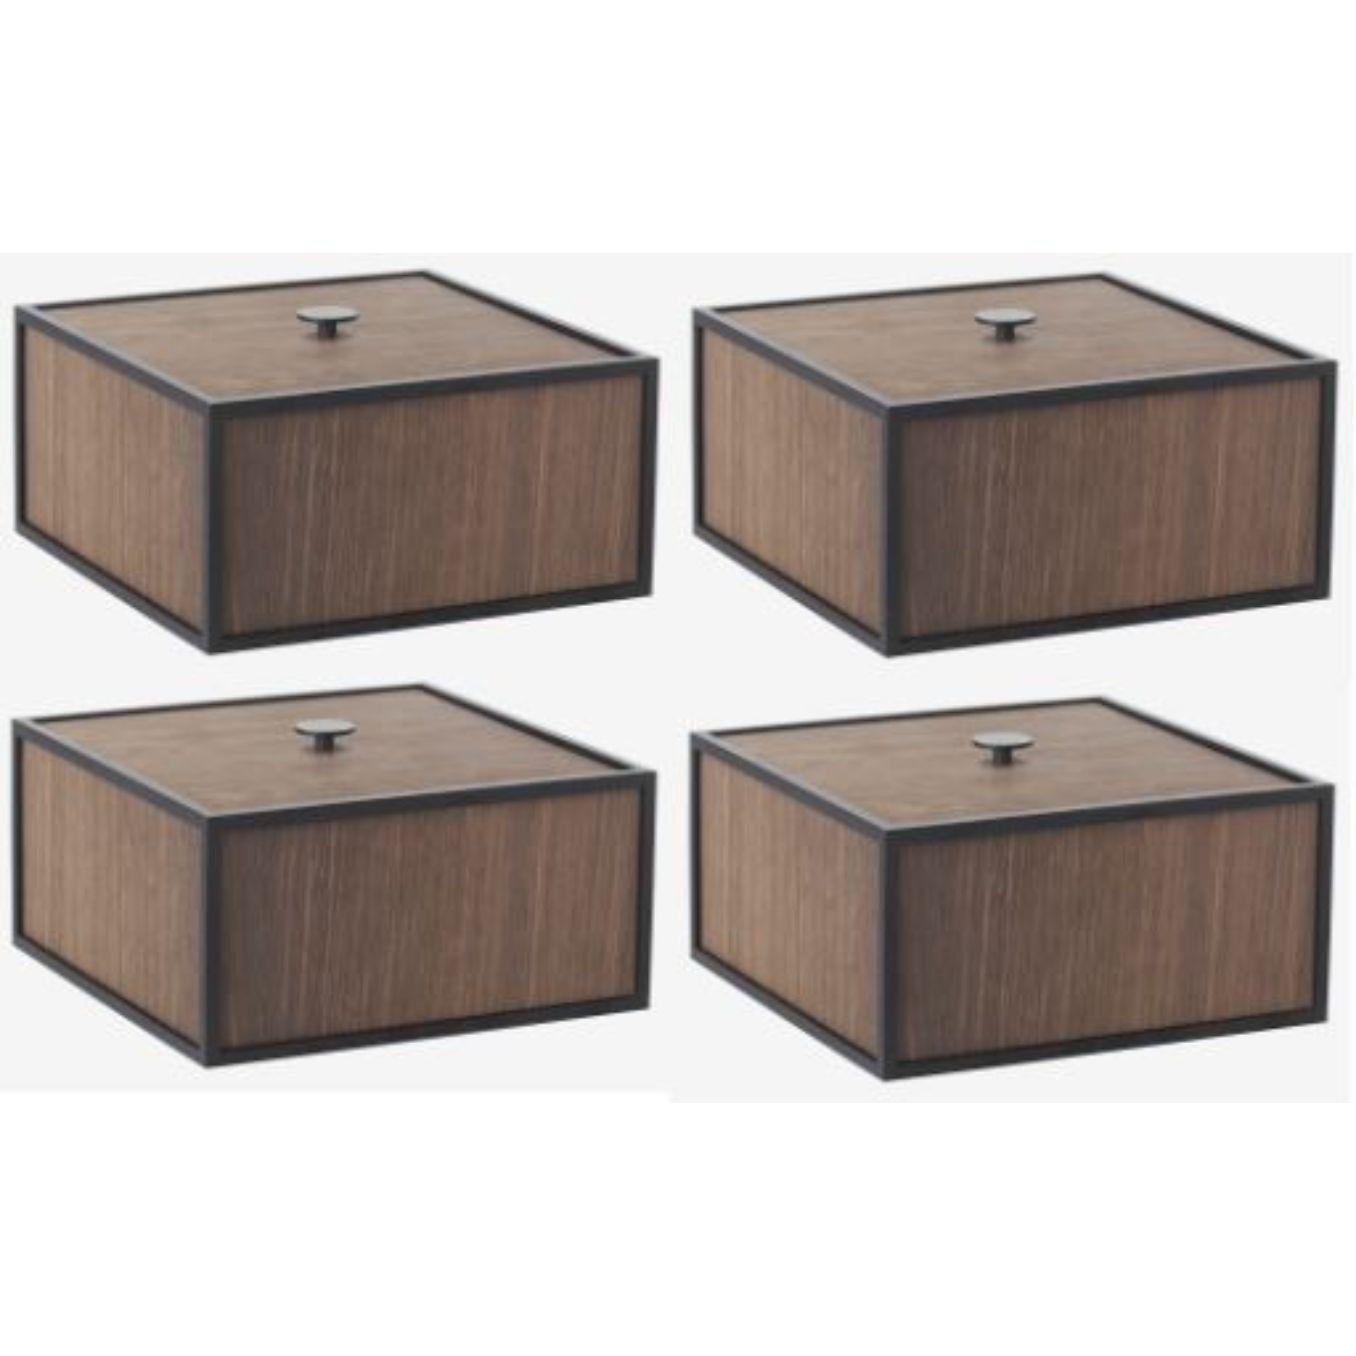 Set of 4 smoked oak frame 20 box by Lassen
Dimensions: d 20 x w 20 x h 10 cm 
Materials: Melamin, Melamine, Metal, Veneer
Weight: 2.00 Kg

Frame box is a square box in a cubistic shape. The simple boxes are inspired by the Kubus candleholder by